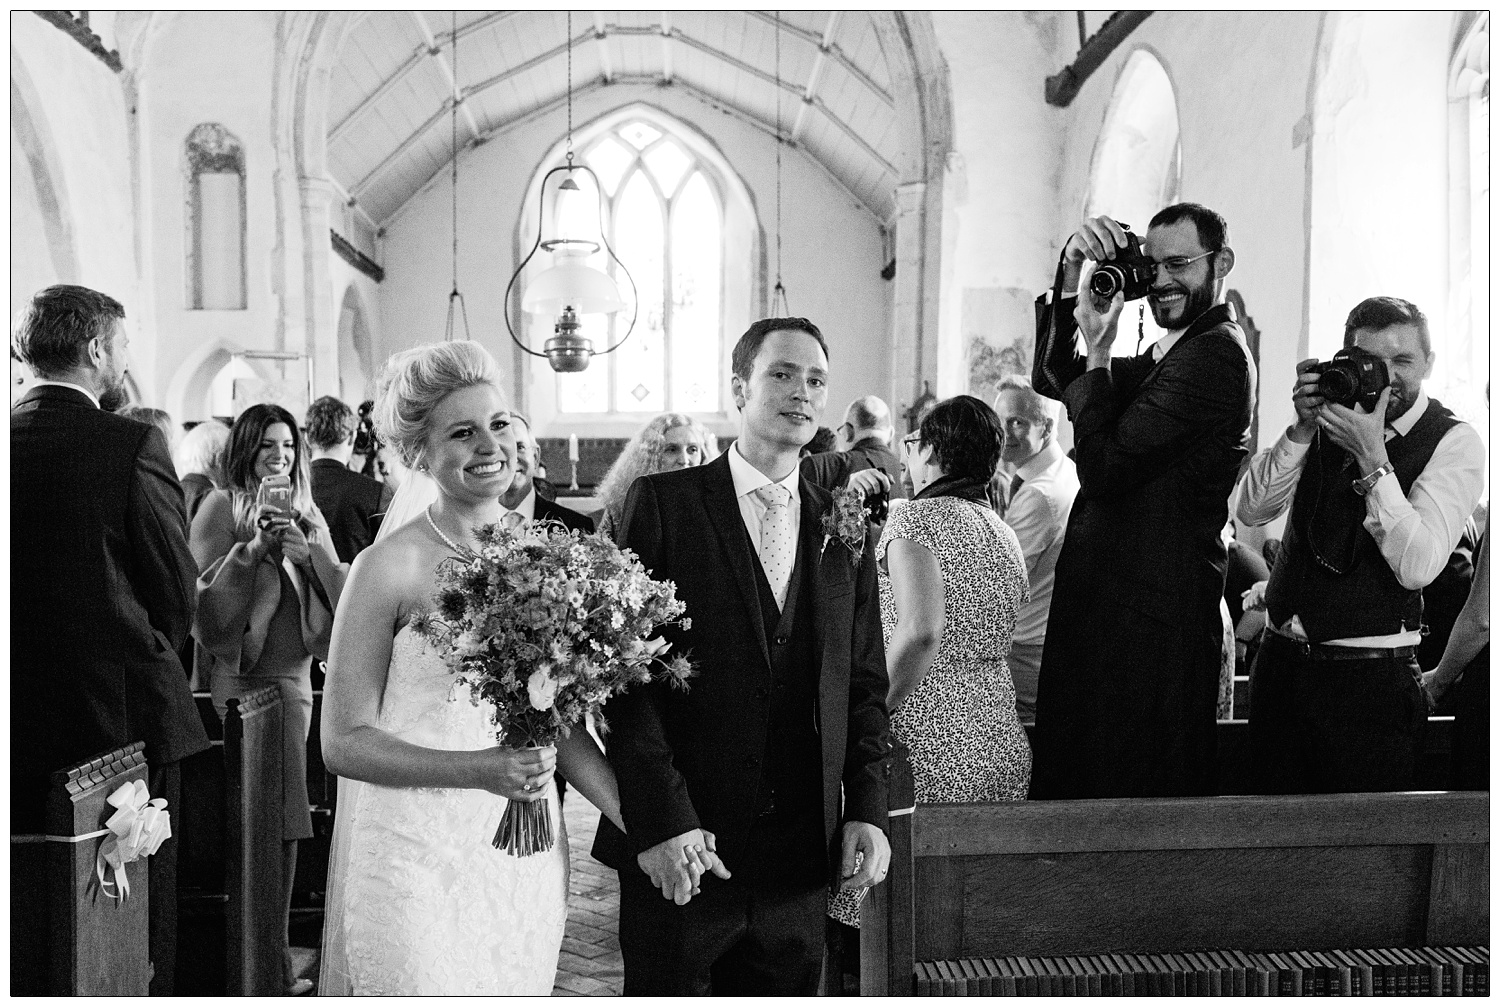 Bride and groom walking down the aisle after getting married in St Peter & St Paul's Church in Alpheton